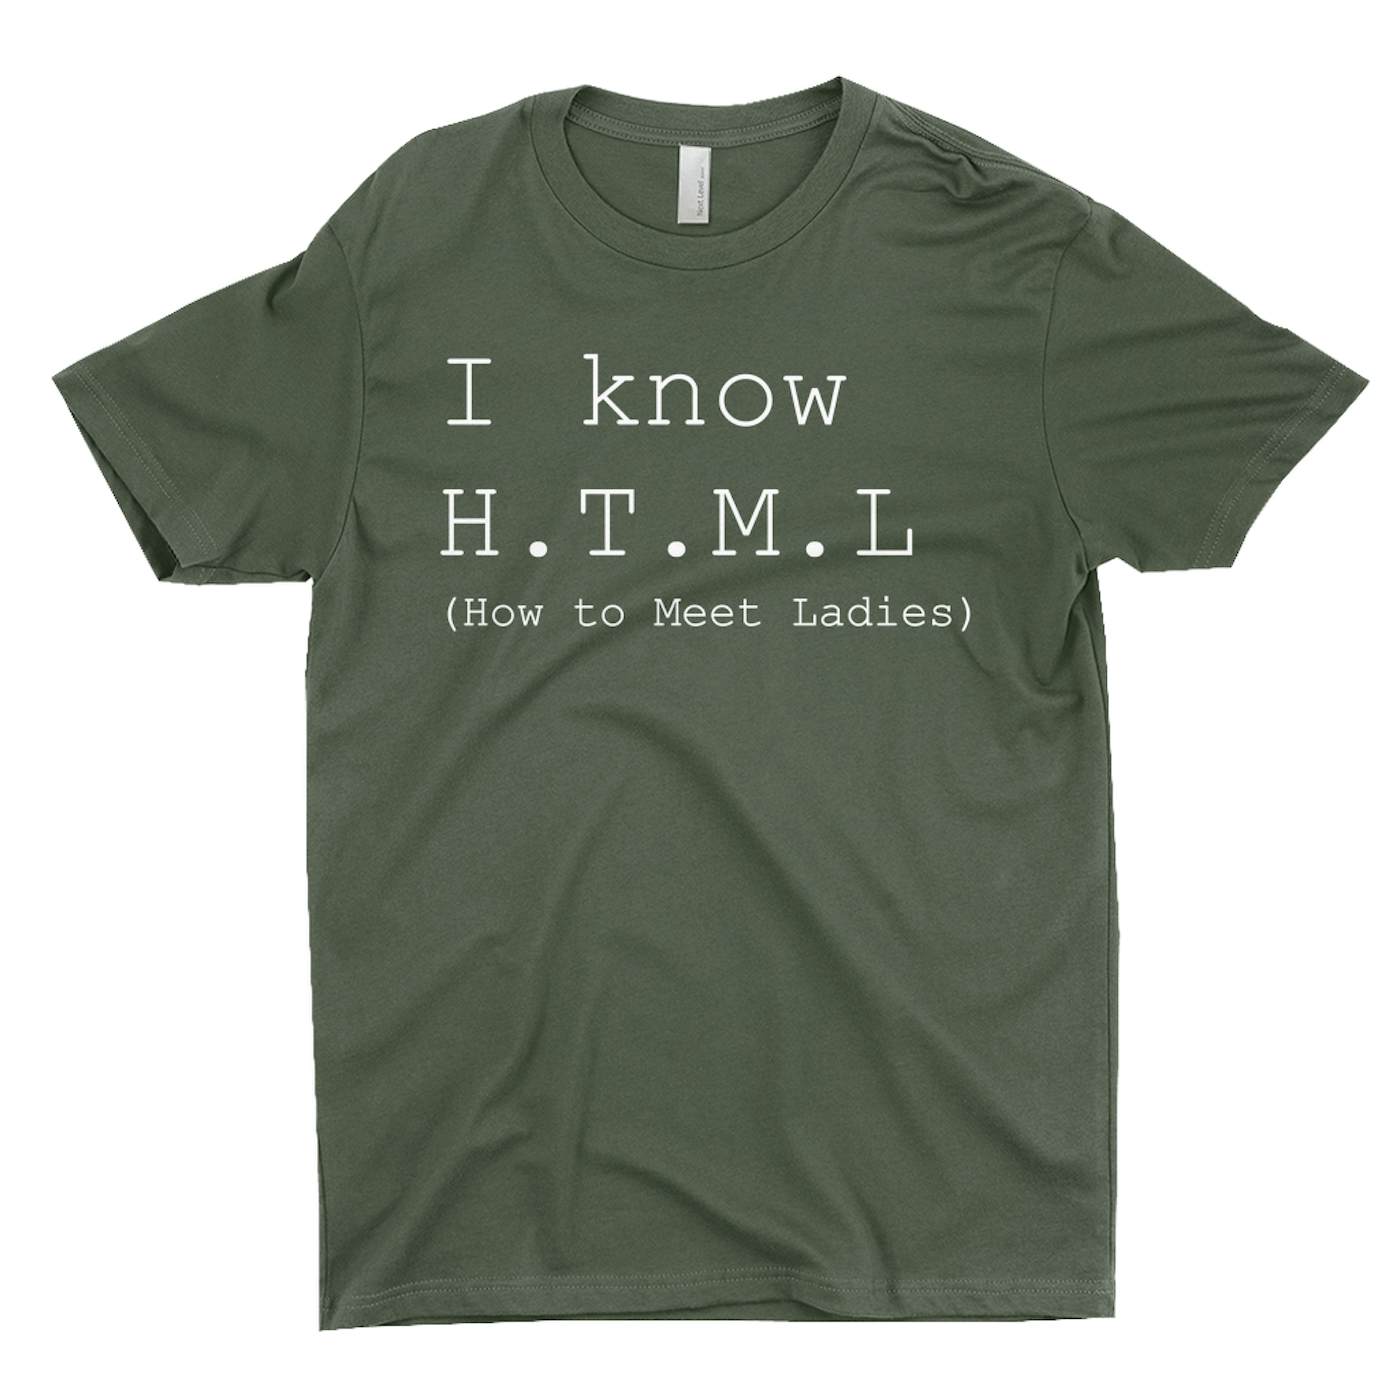 Pop Culture T-Shirt | I Know H.T.M.L. Inspired By Silicon Valley Pop Culture Shirt